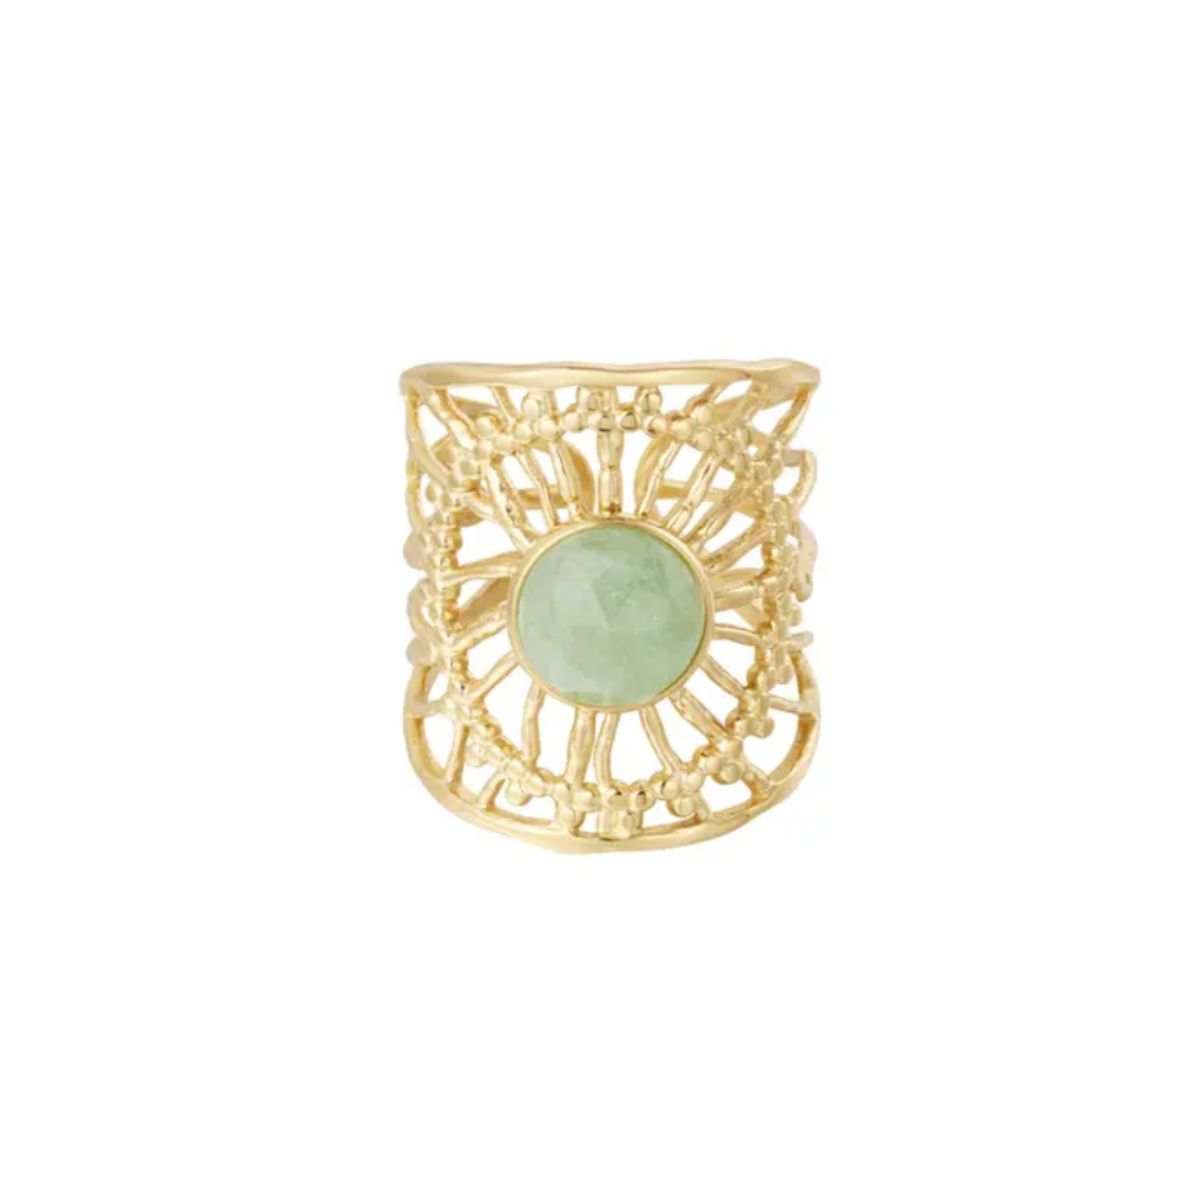 web-ring-with-green-stone-stainless-steel